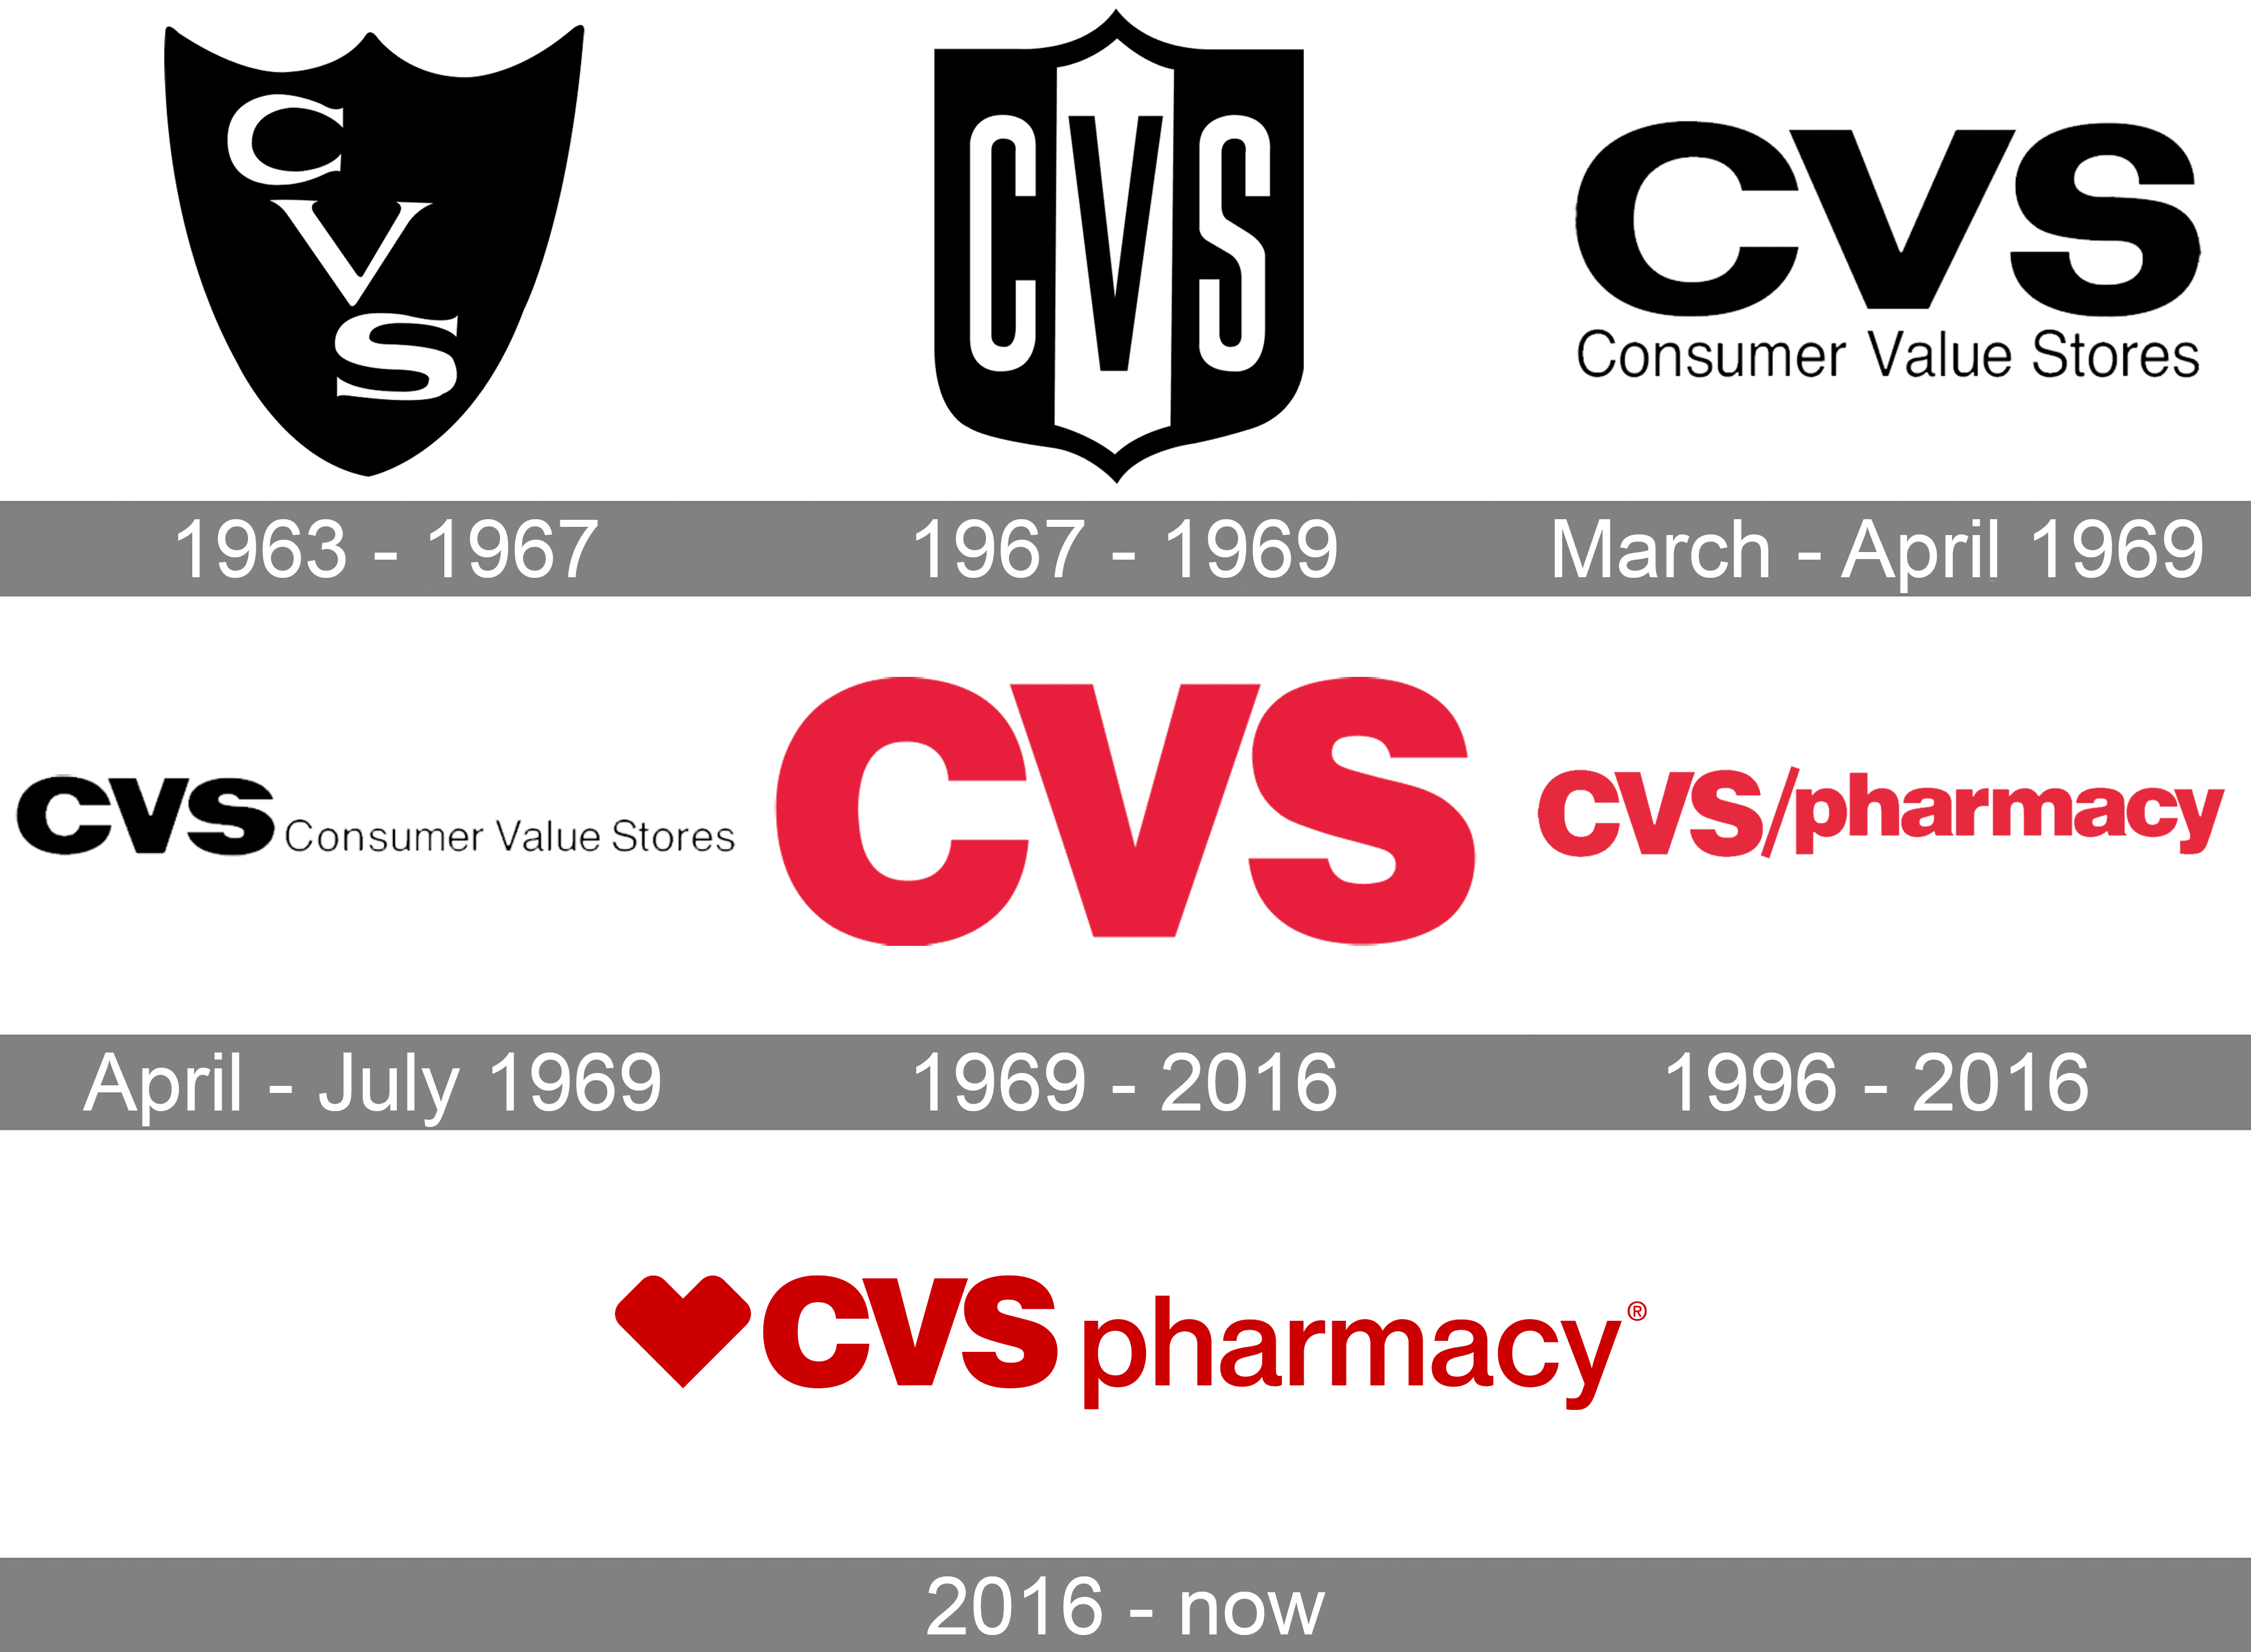 what does cvs stabd for